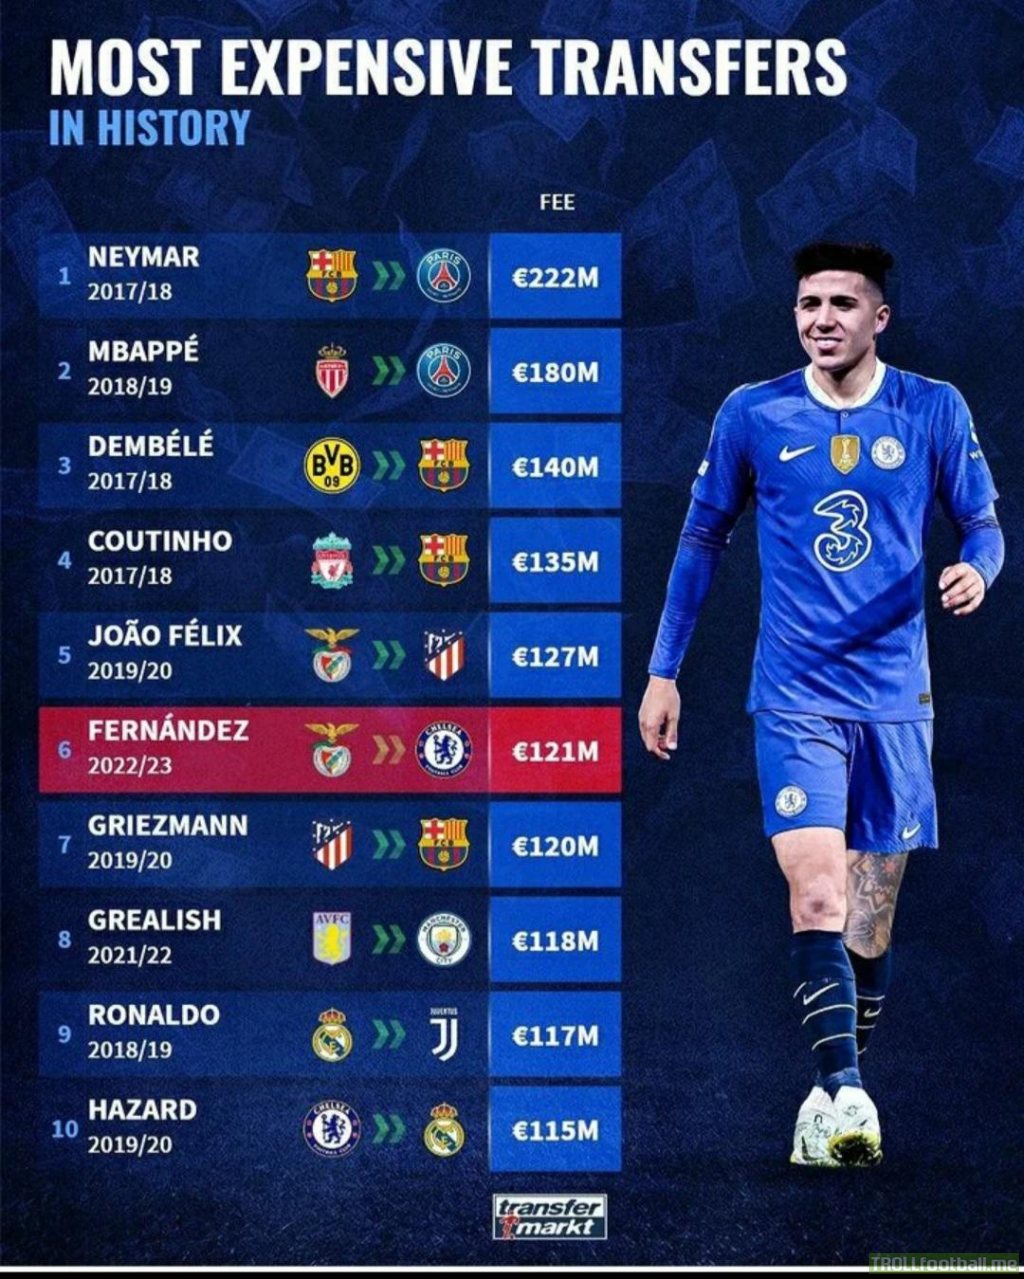 [Transfermarkt] Enzo Fernandez became 6th most expensive player in history